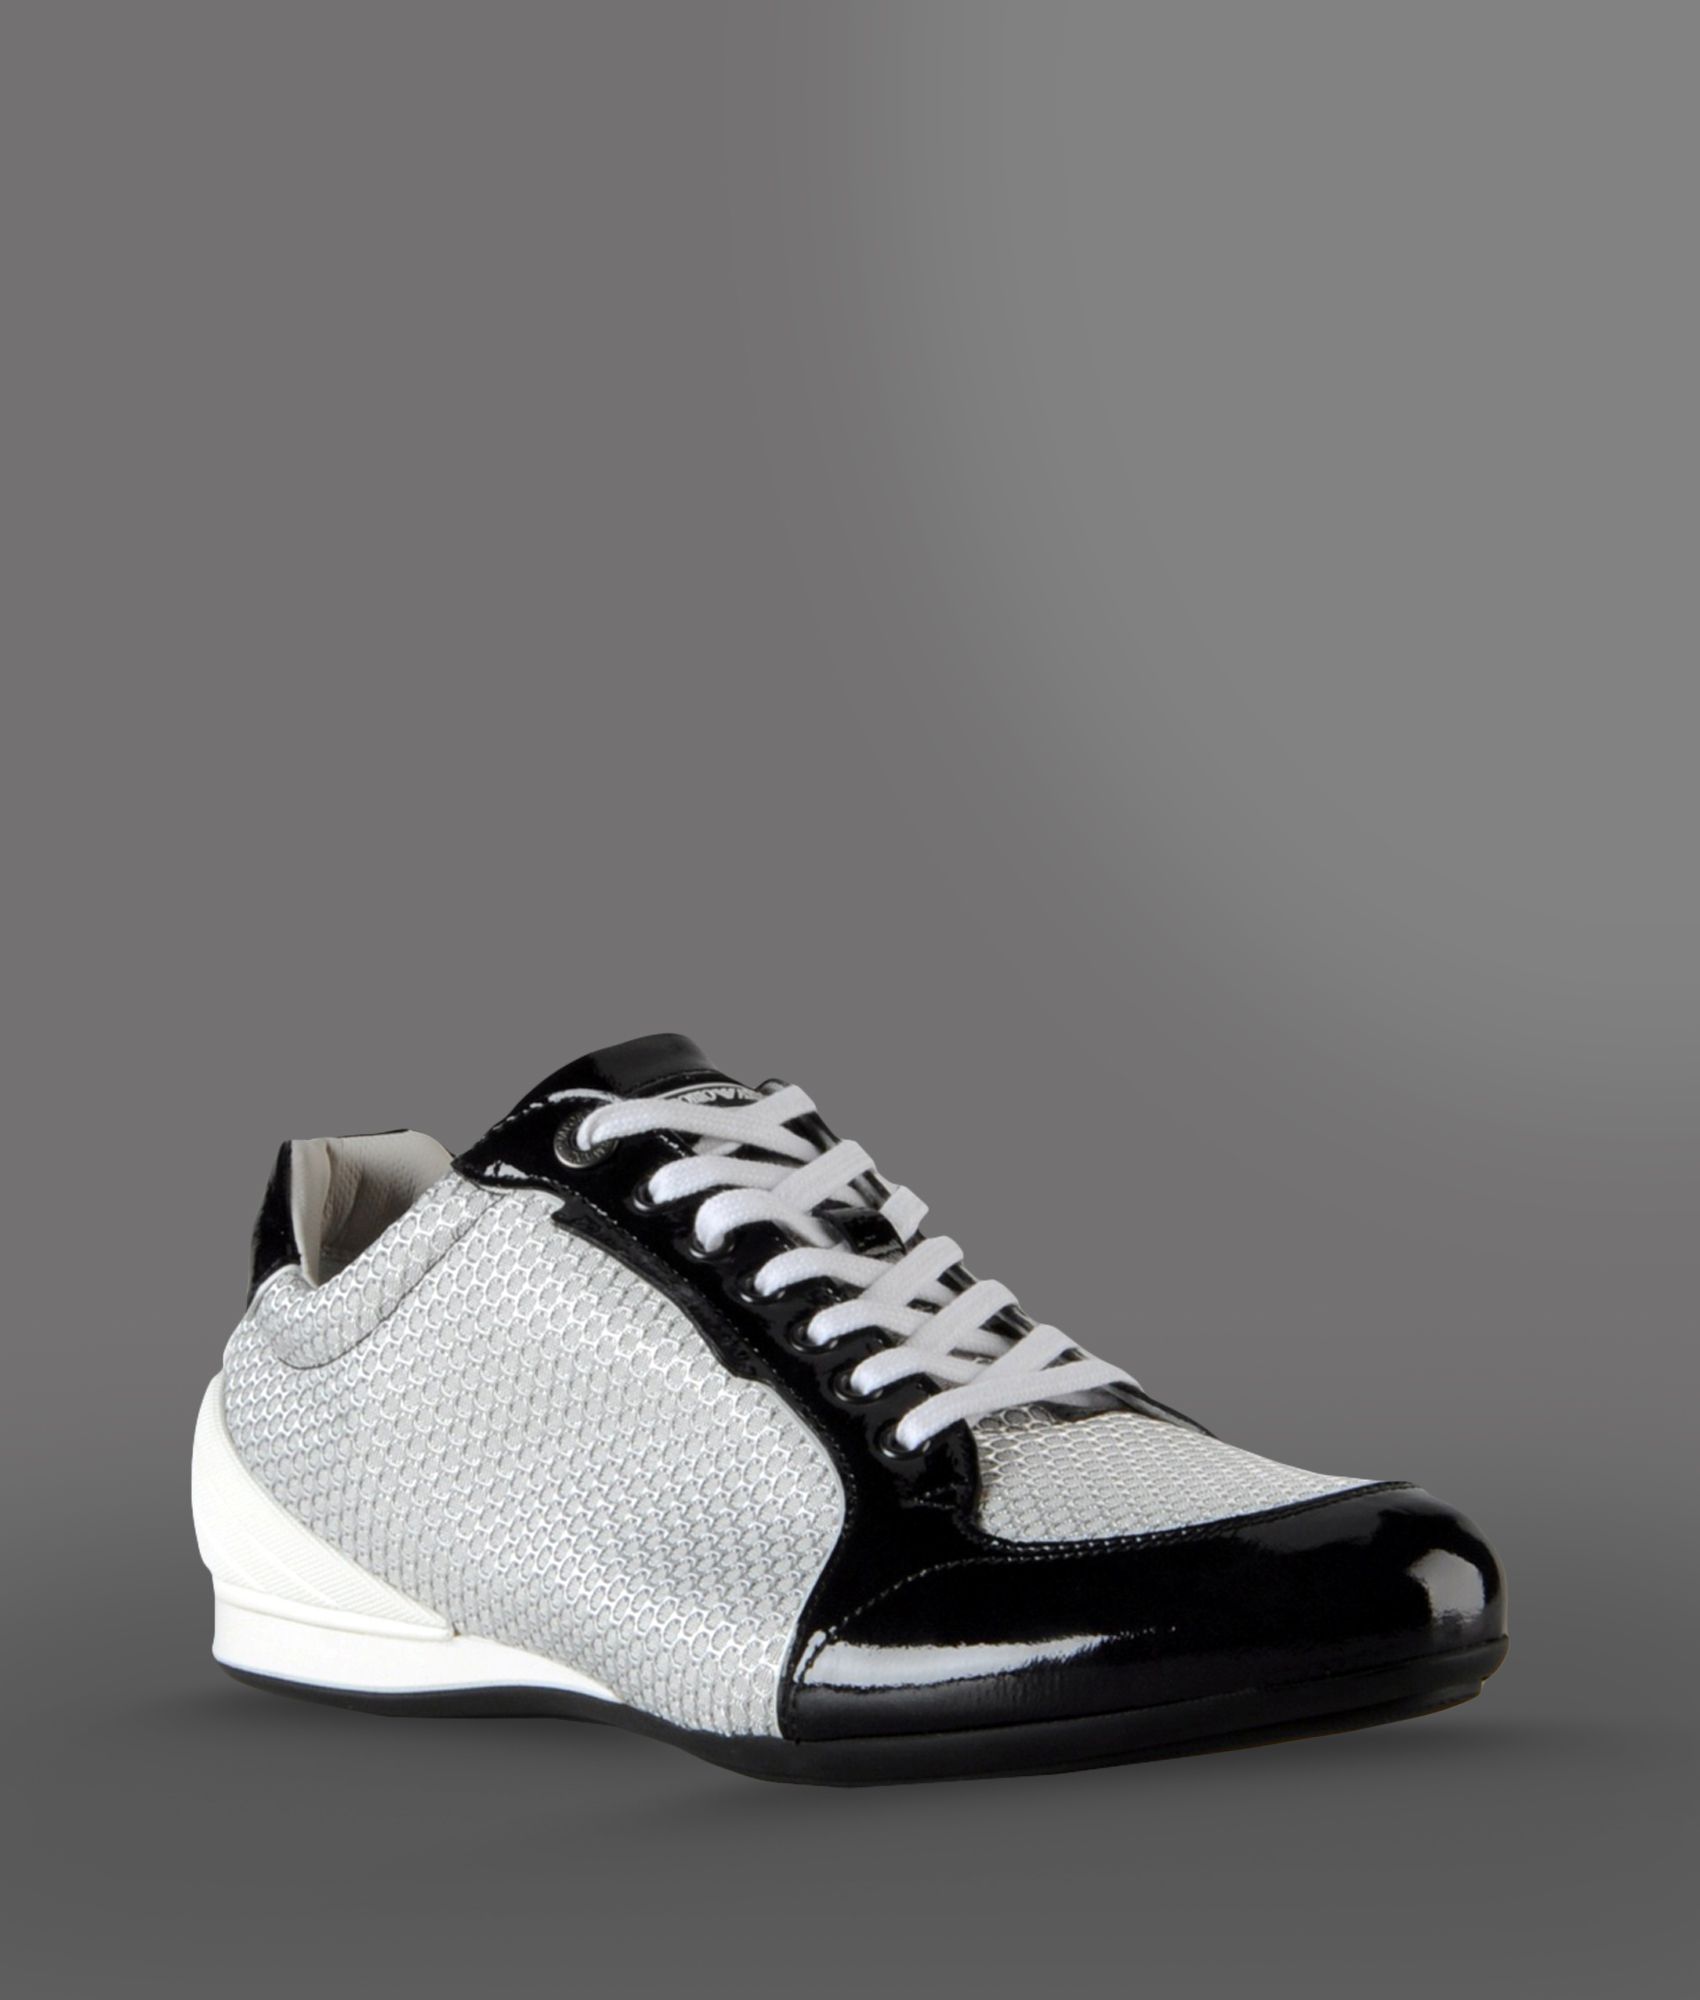 Three important things to know about the Armani sneaker